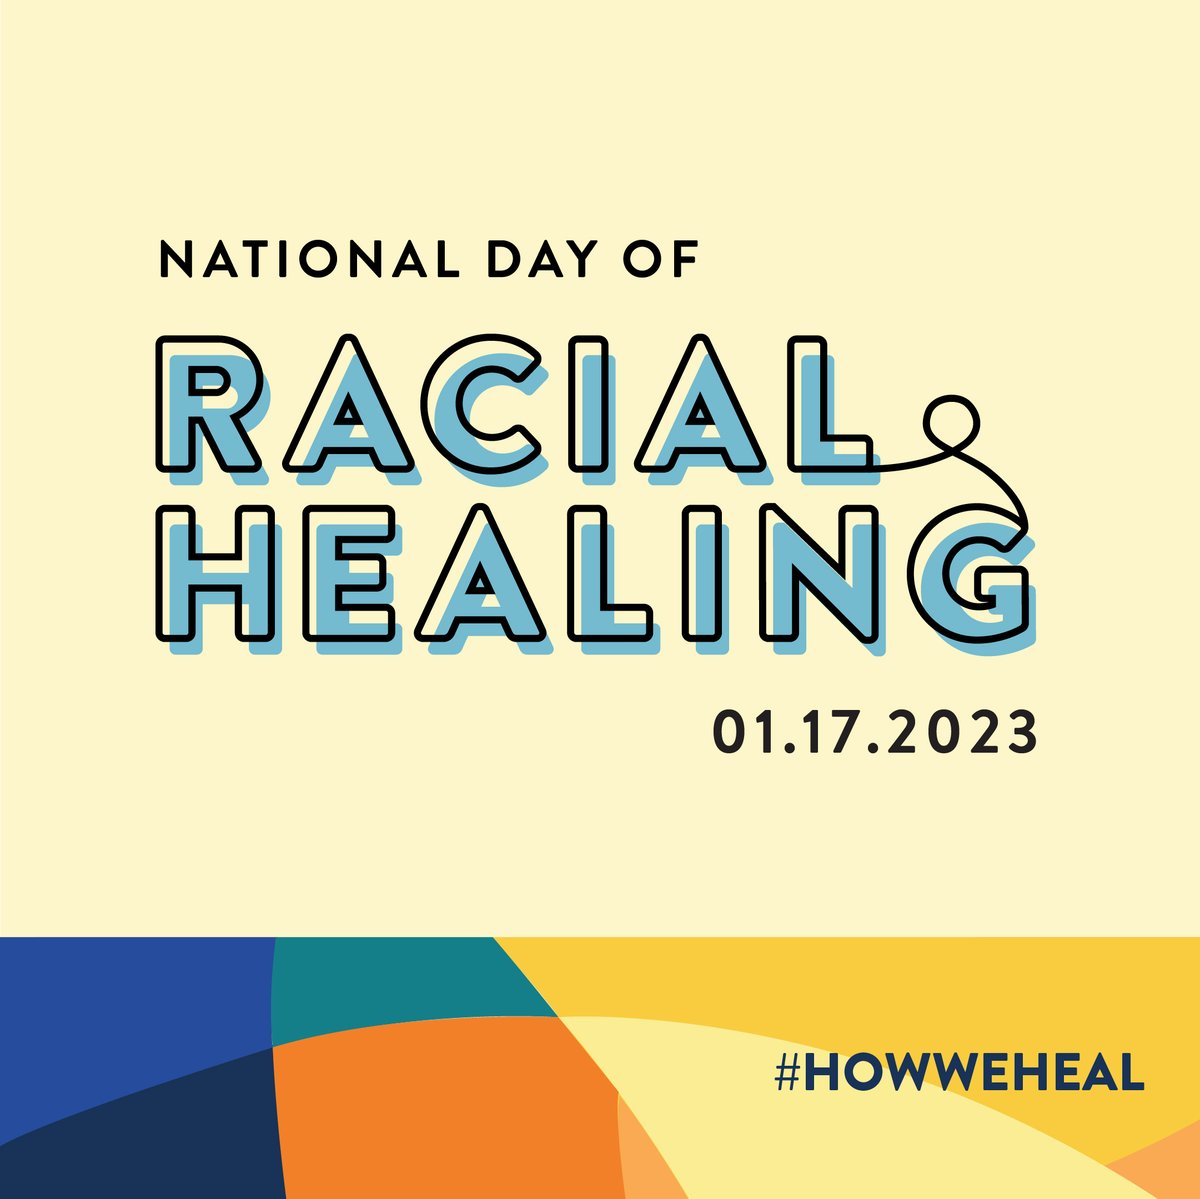 GCPS honors the commitment to equity and the work to end racism embodied in the National Day of Racial Healing. Together we will work to support that commitment throughout the year as a bridge for racial healing, equity, and justice. Learn more here: dayofracialhealing.org